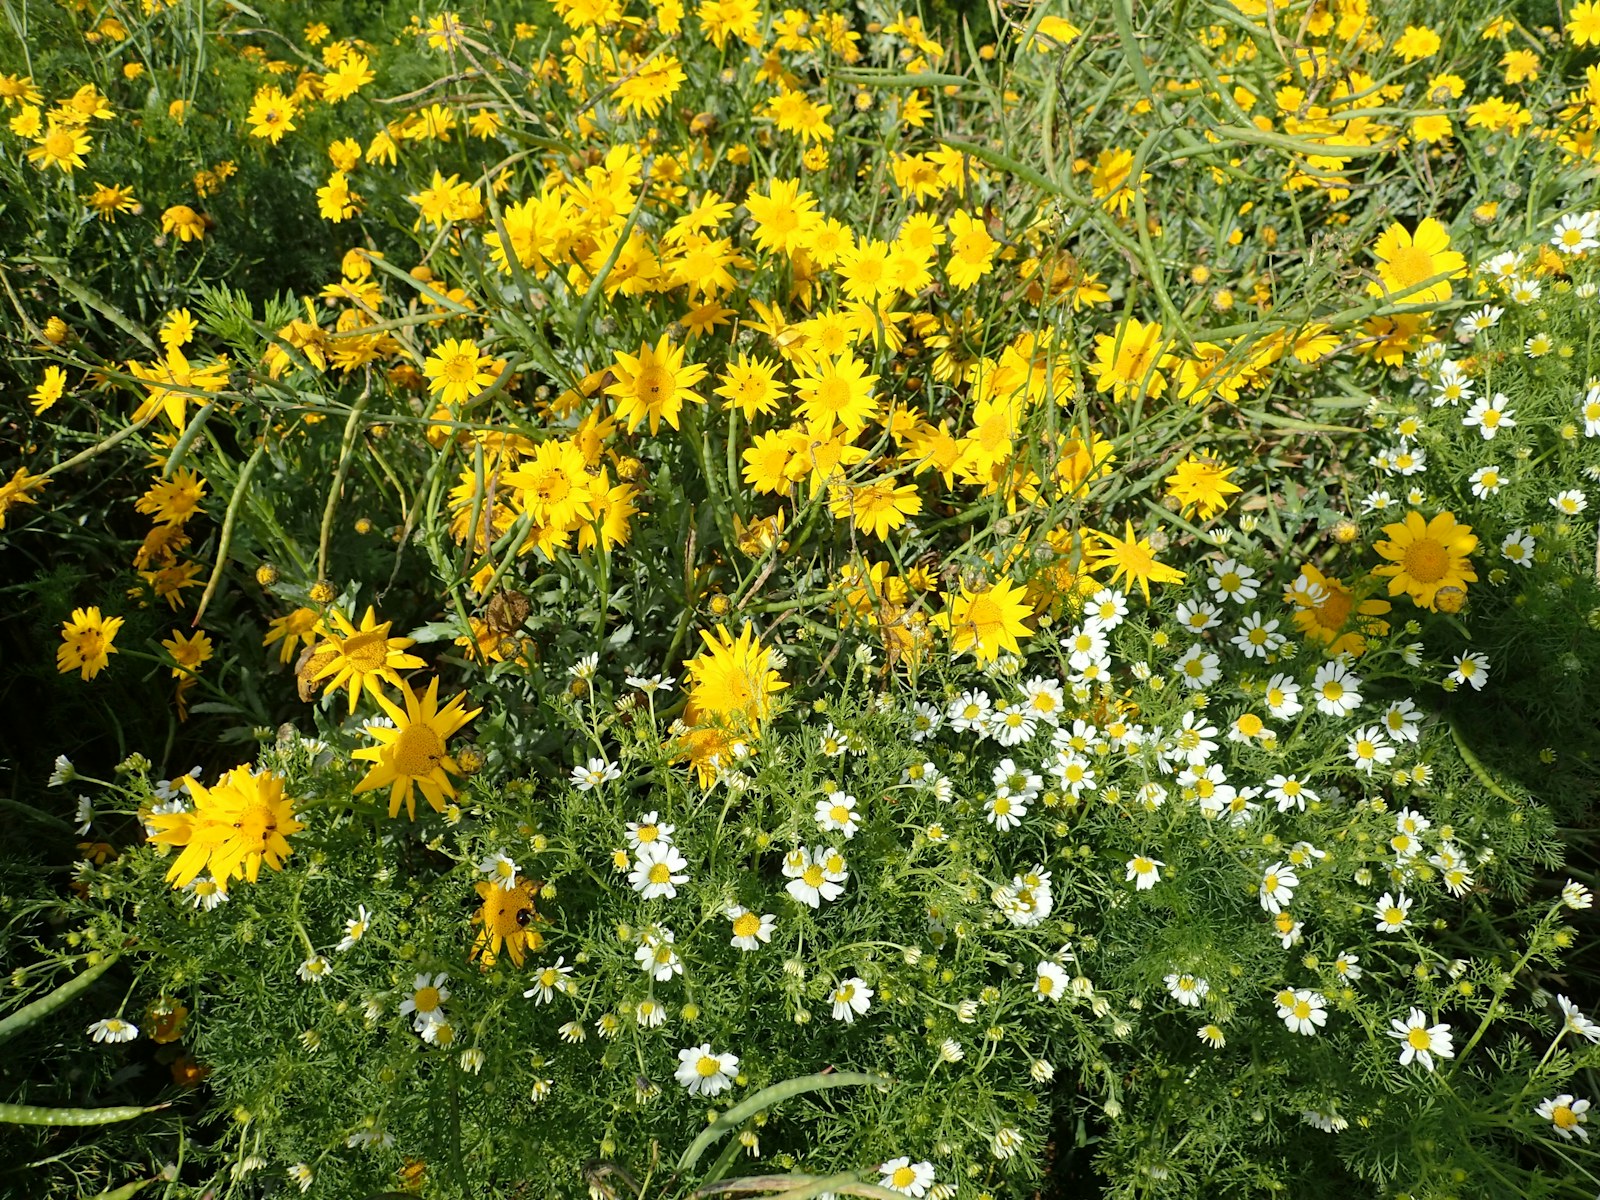 Corn marigold and stinking chamomile flowers growing at Wild Ken Hill